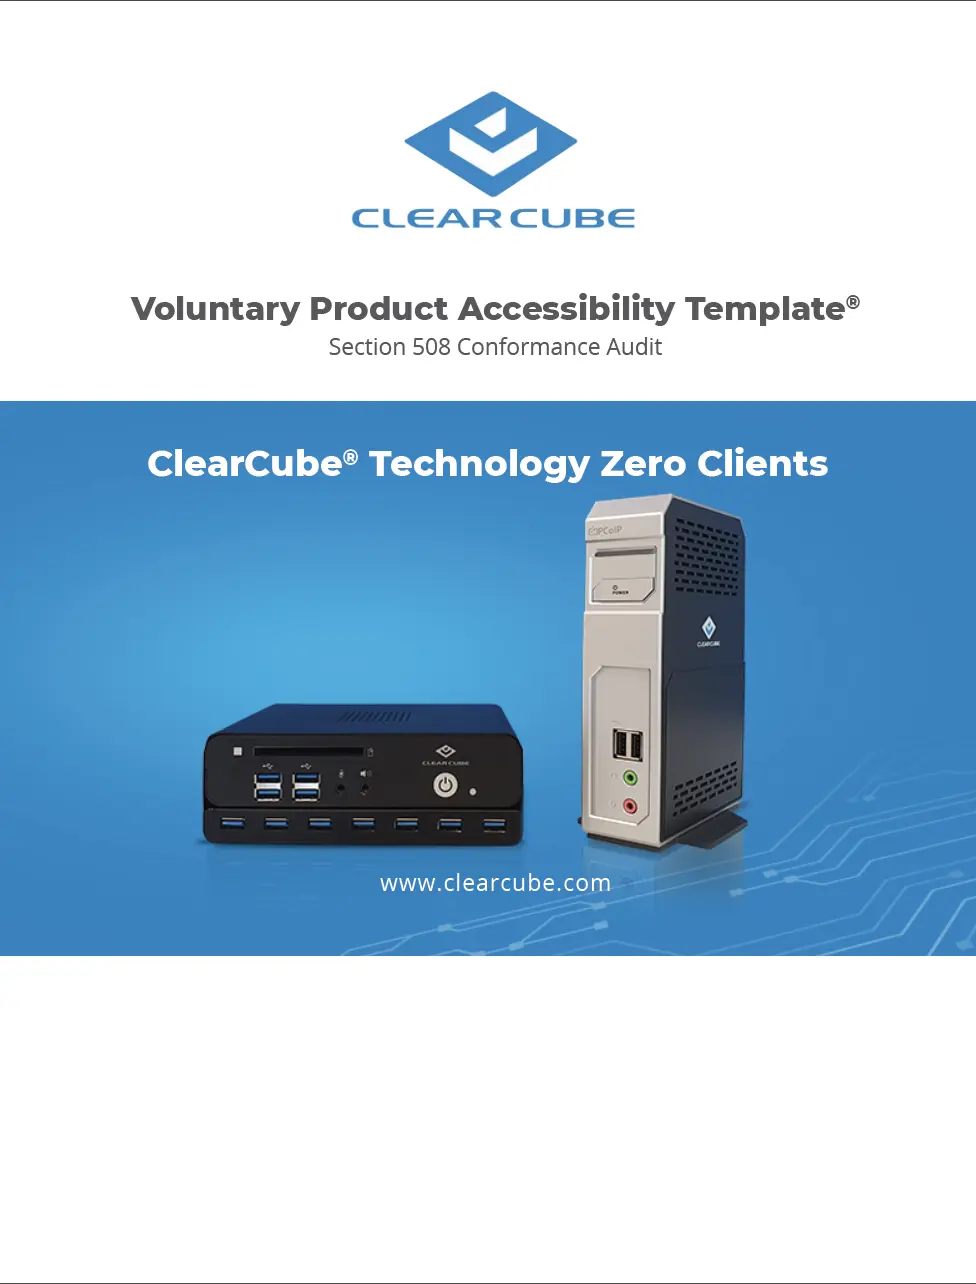 This Voluntary Product Accessibility Template (VPAT) provides guidance on the accessibility characteristics of ClearCube Zero Clients